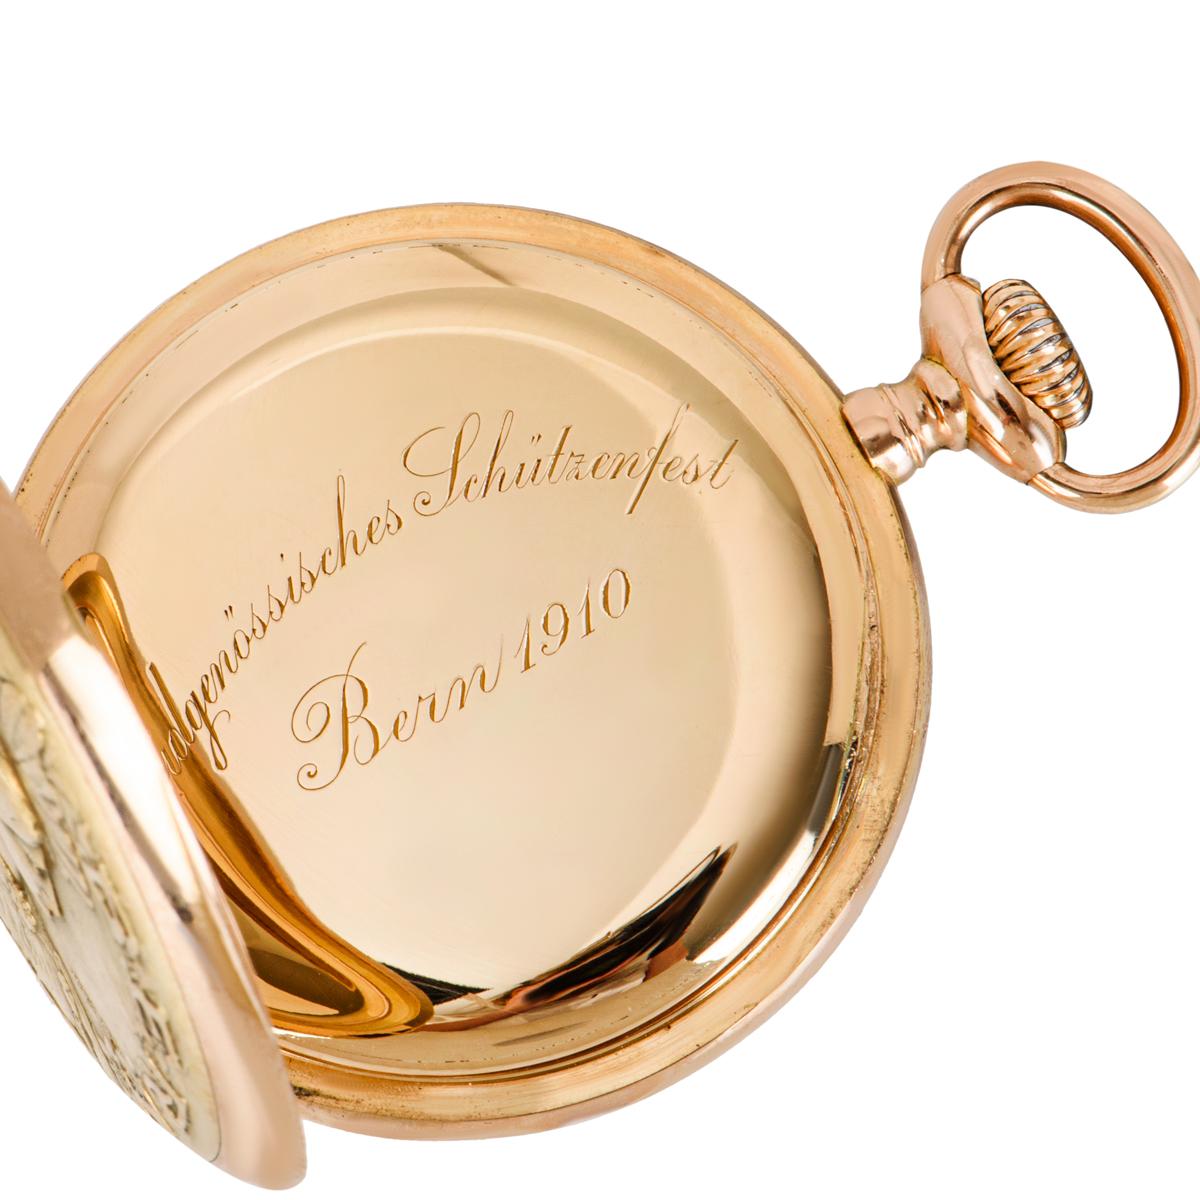 Omega Very Rare Gold Open Face Schutzenfest Bern Pocket Watch, C1910 In Excellent Condition In London, GB